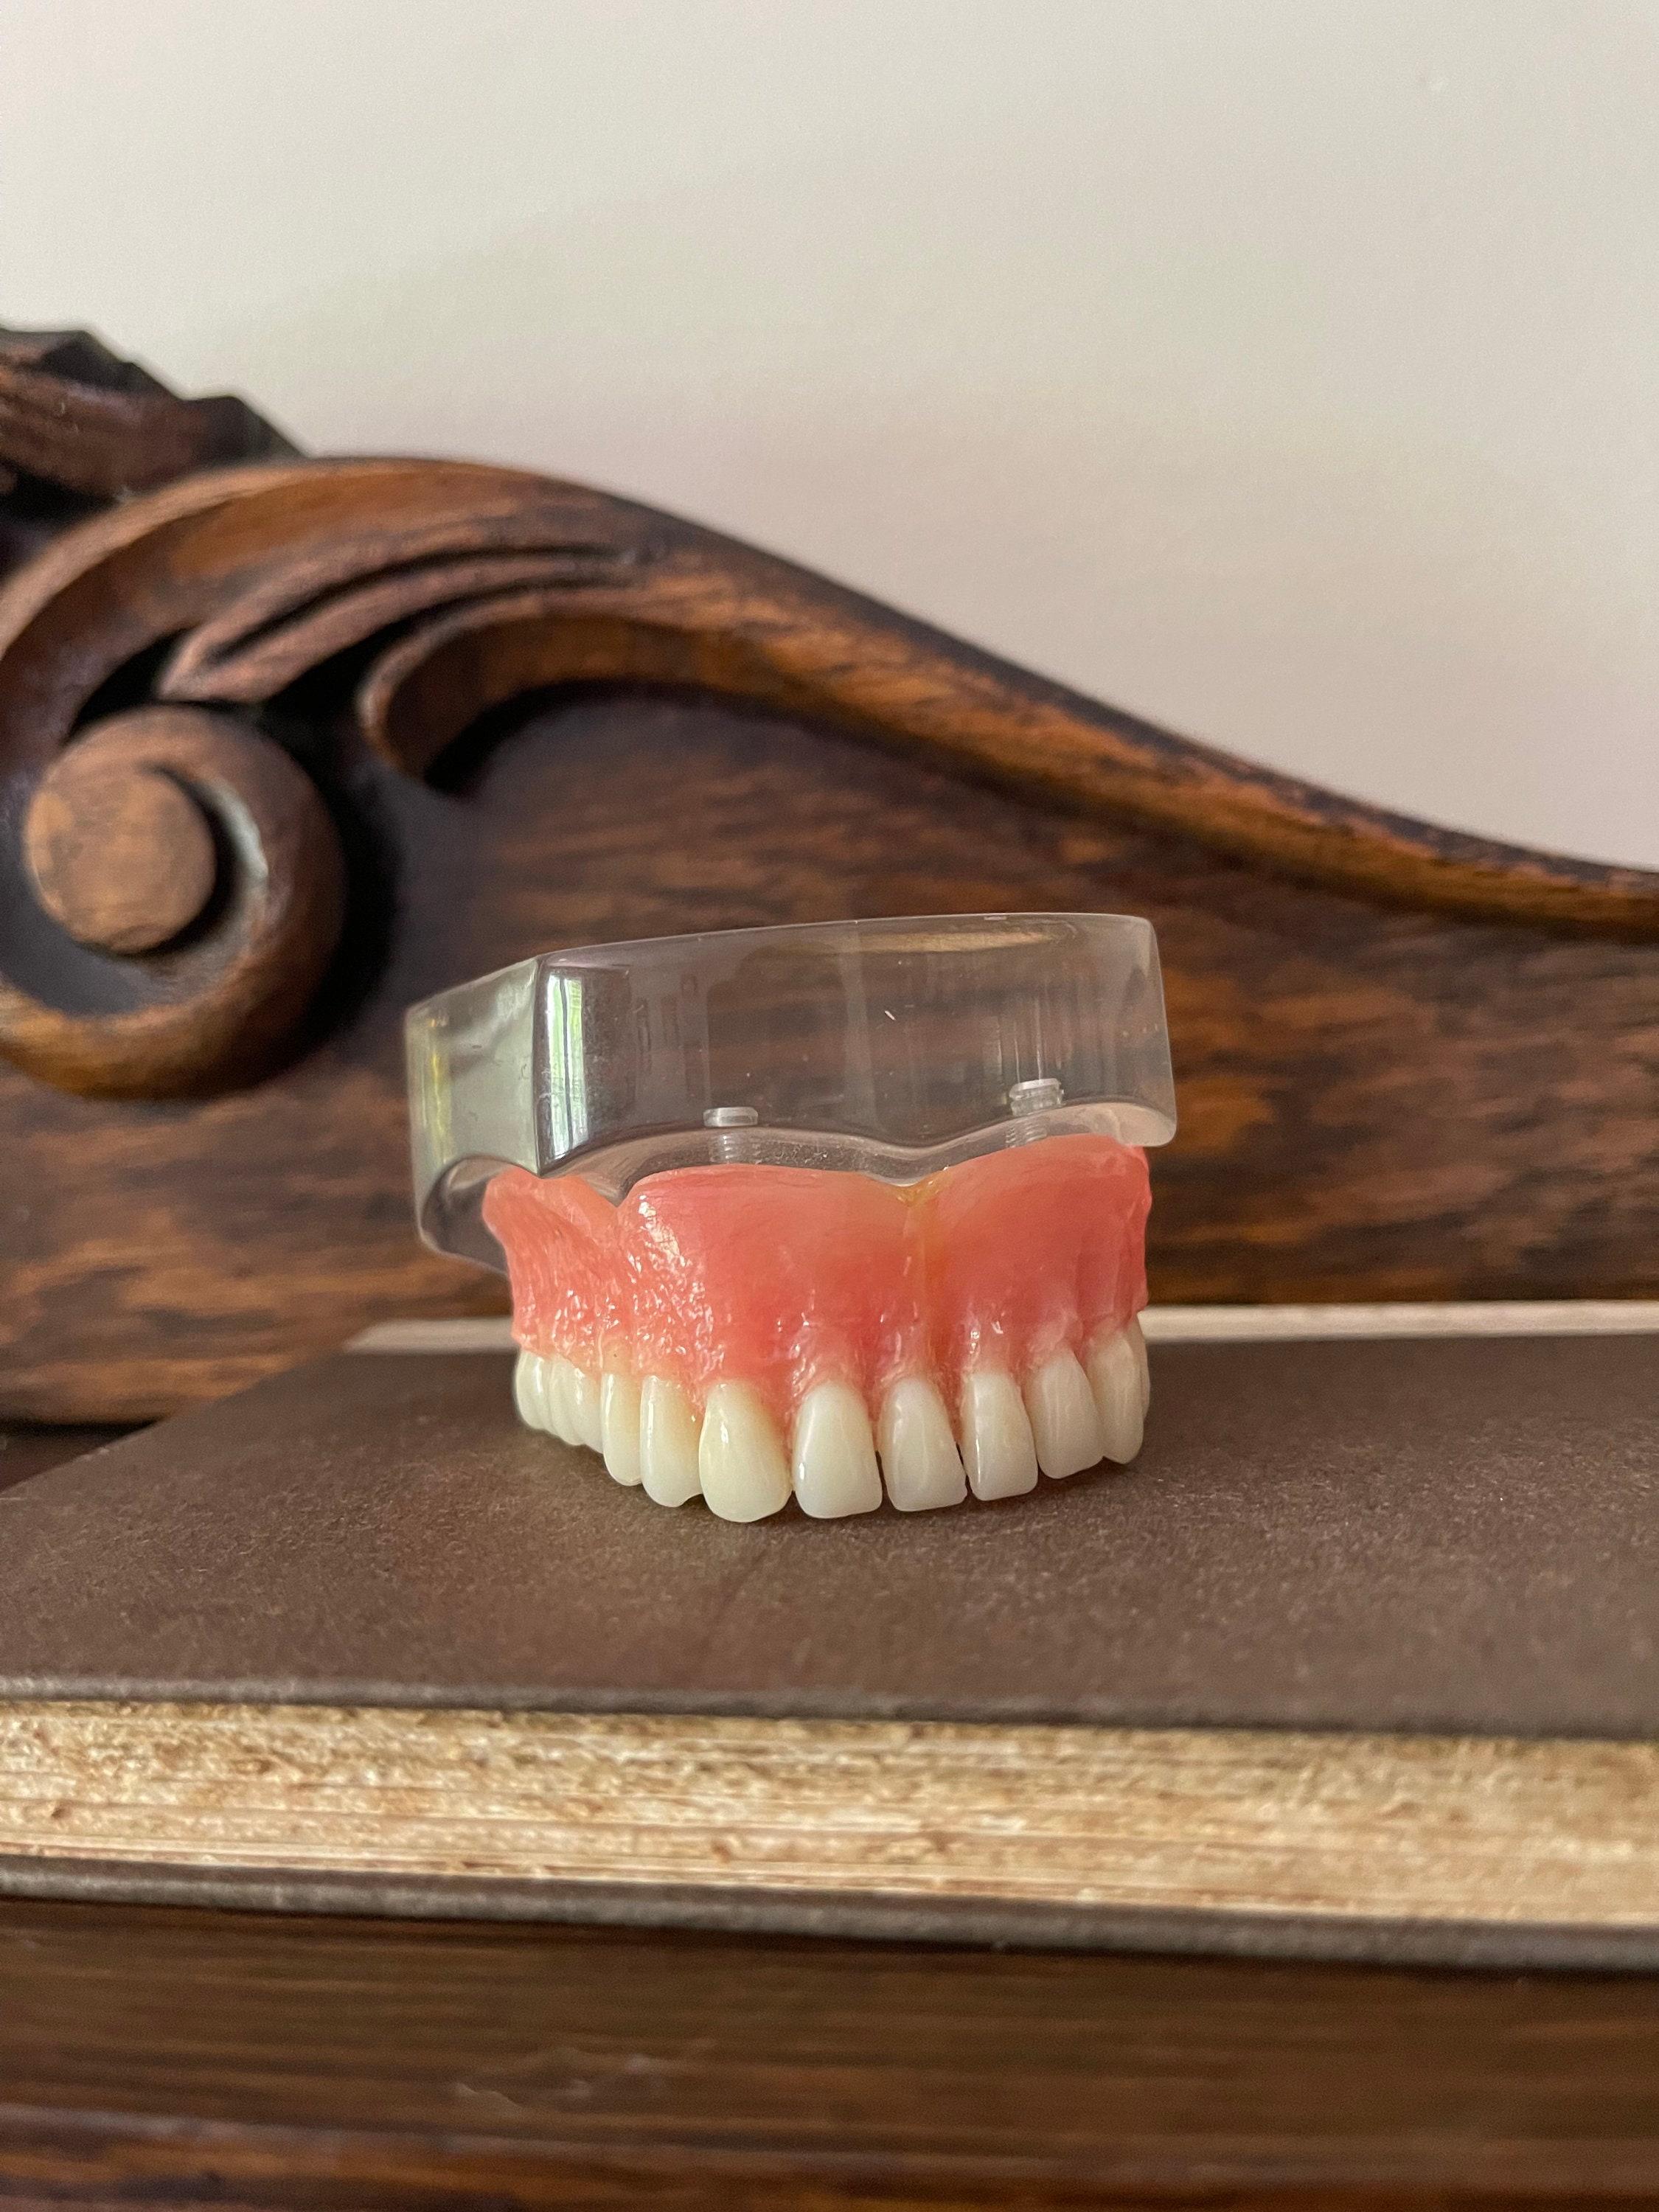 4 Sets Acrylic Resin Fake Teeth Denture Replacement Teeth False Teeth Teeth  Upper and Lower Synthetic Resin Teeth for Halloween Party Replacement, 112